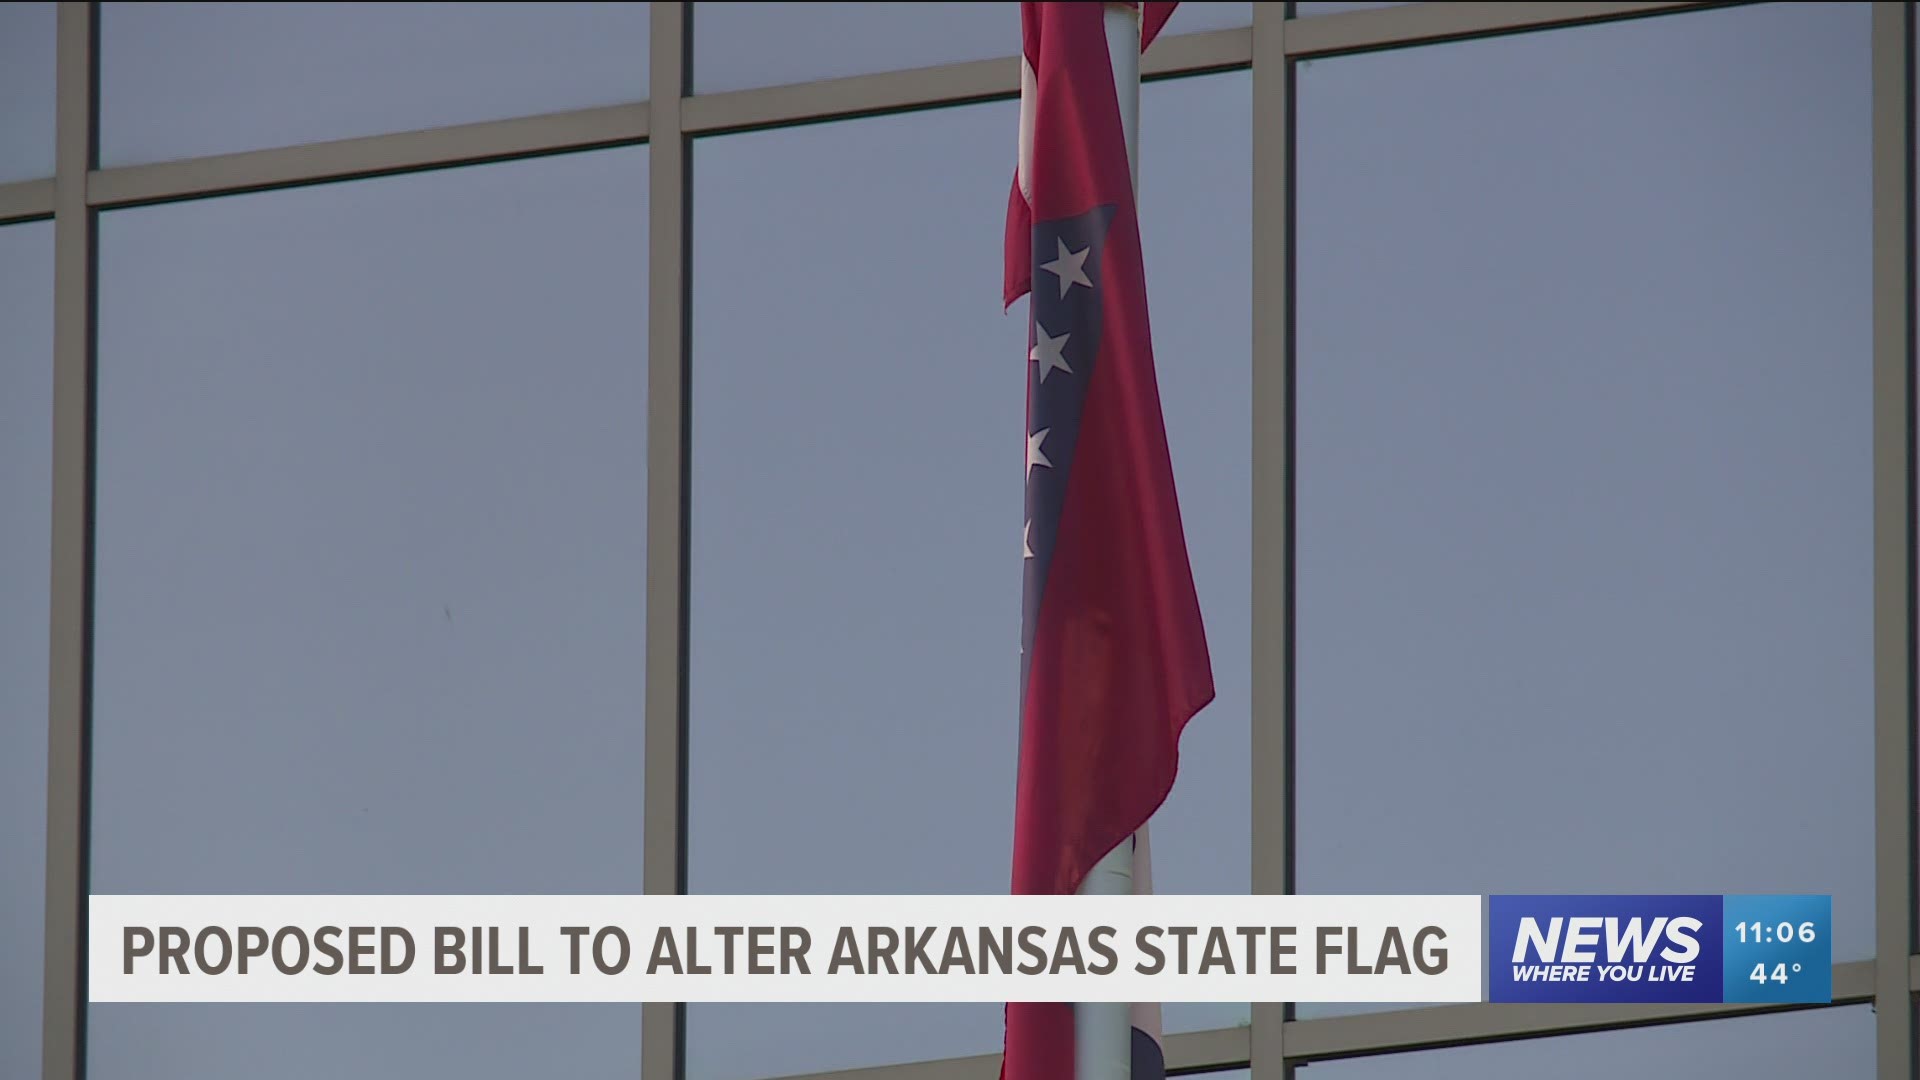 The bill aims to remove the star representing the Confederacy.